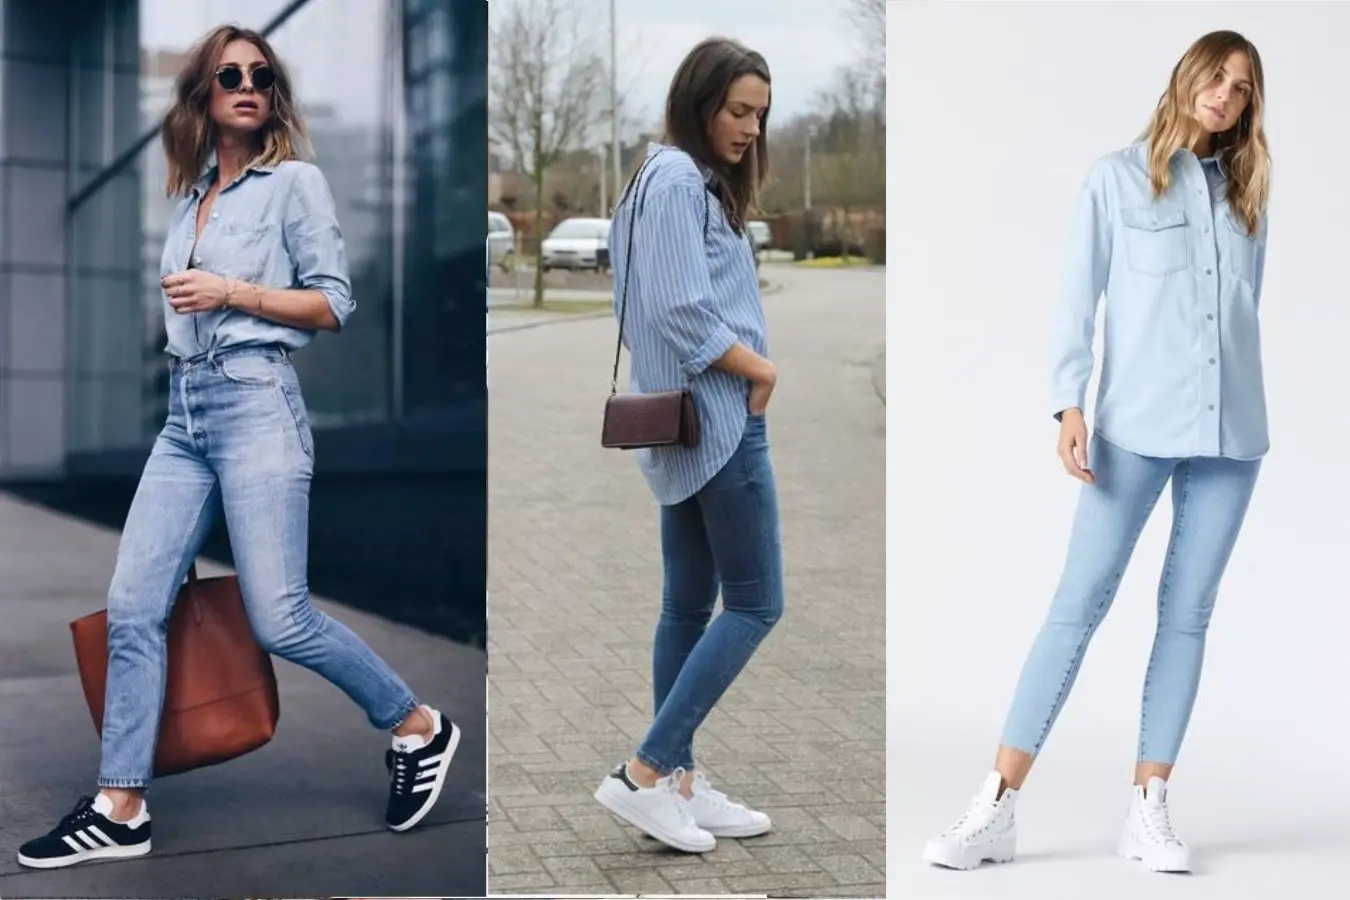 Pair Light Blue Jeans With Blue Button-Up Shirts And Sneakers